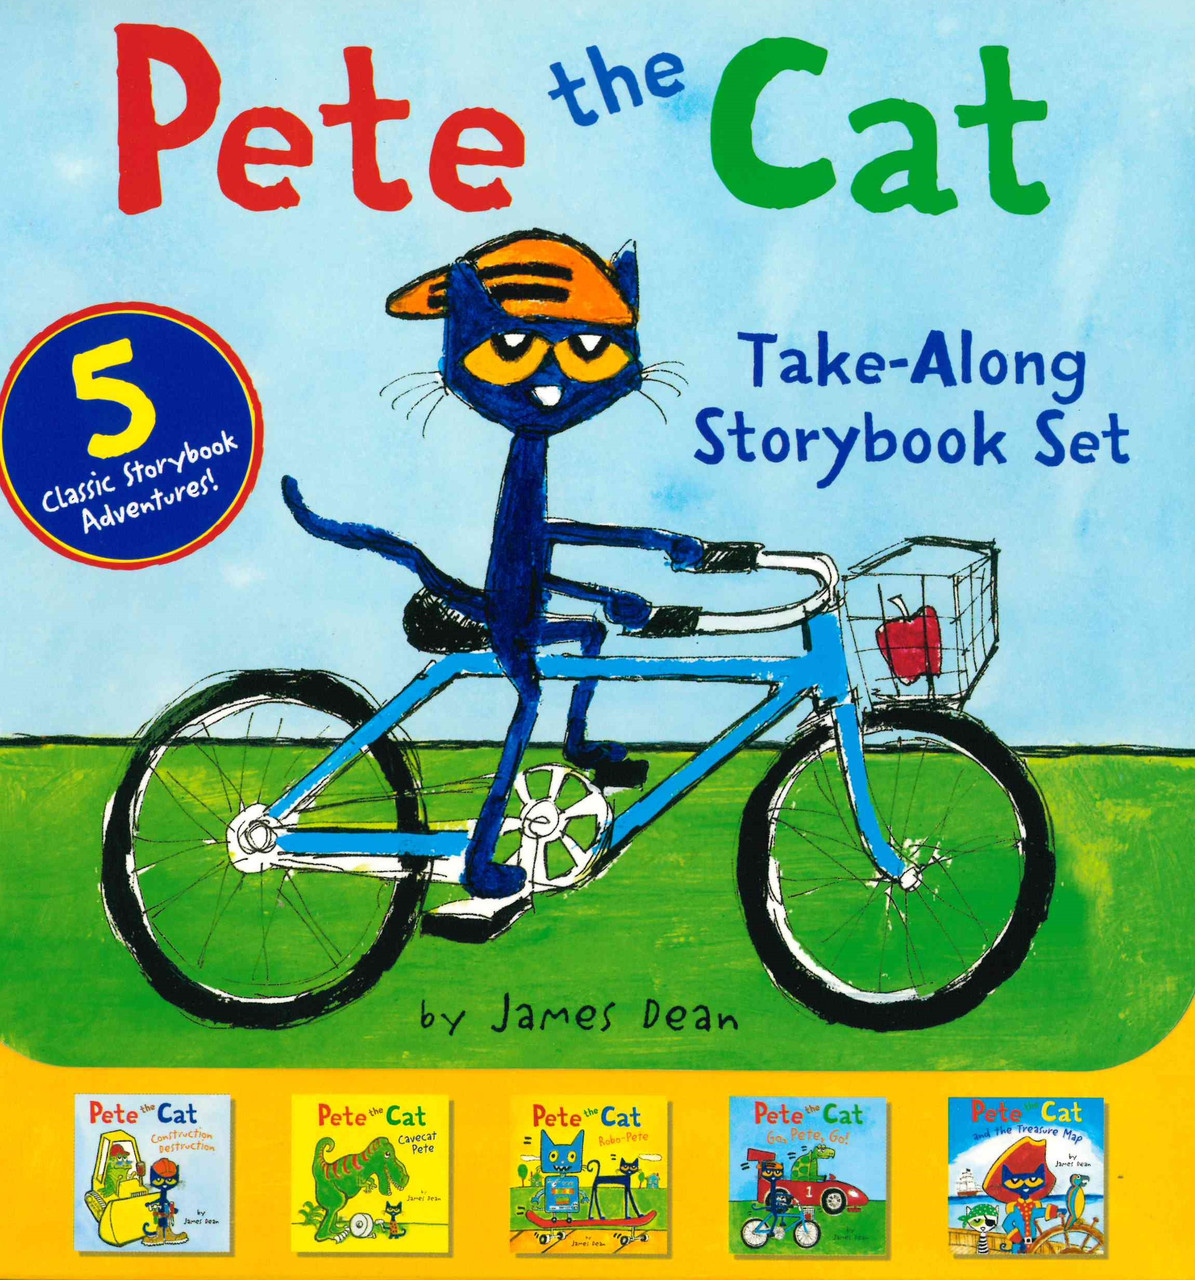 Pete the Cat Saves Up (I Can Read Level 1) (Paperback)